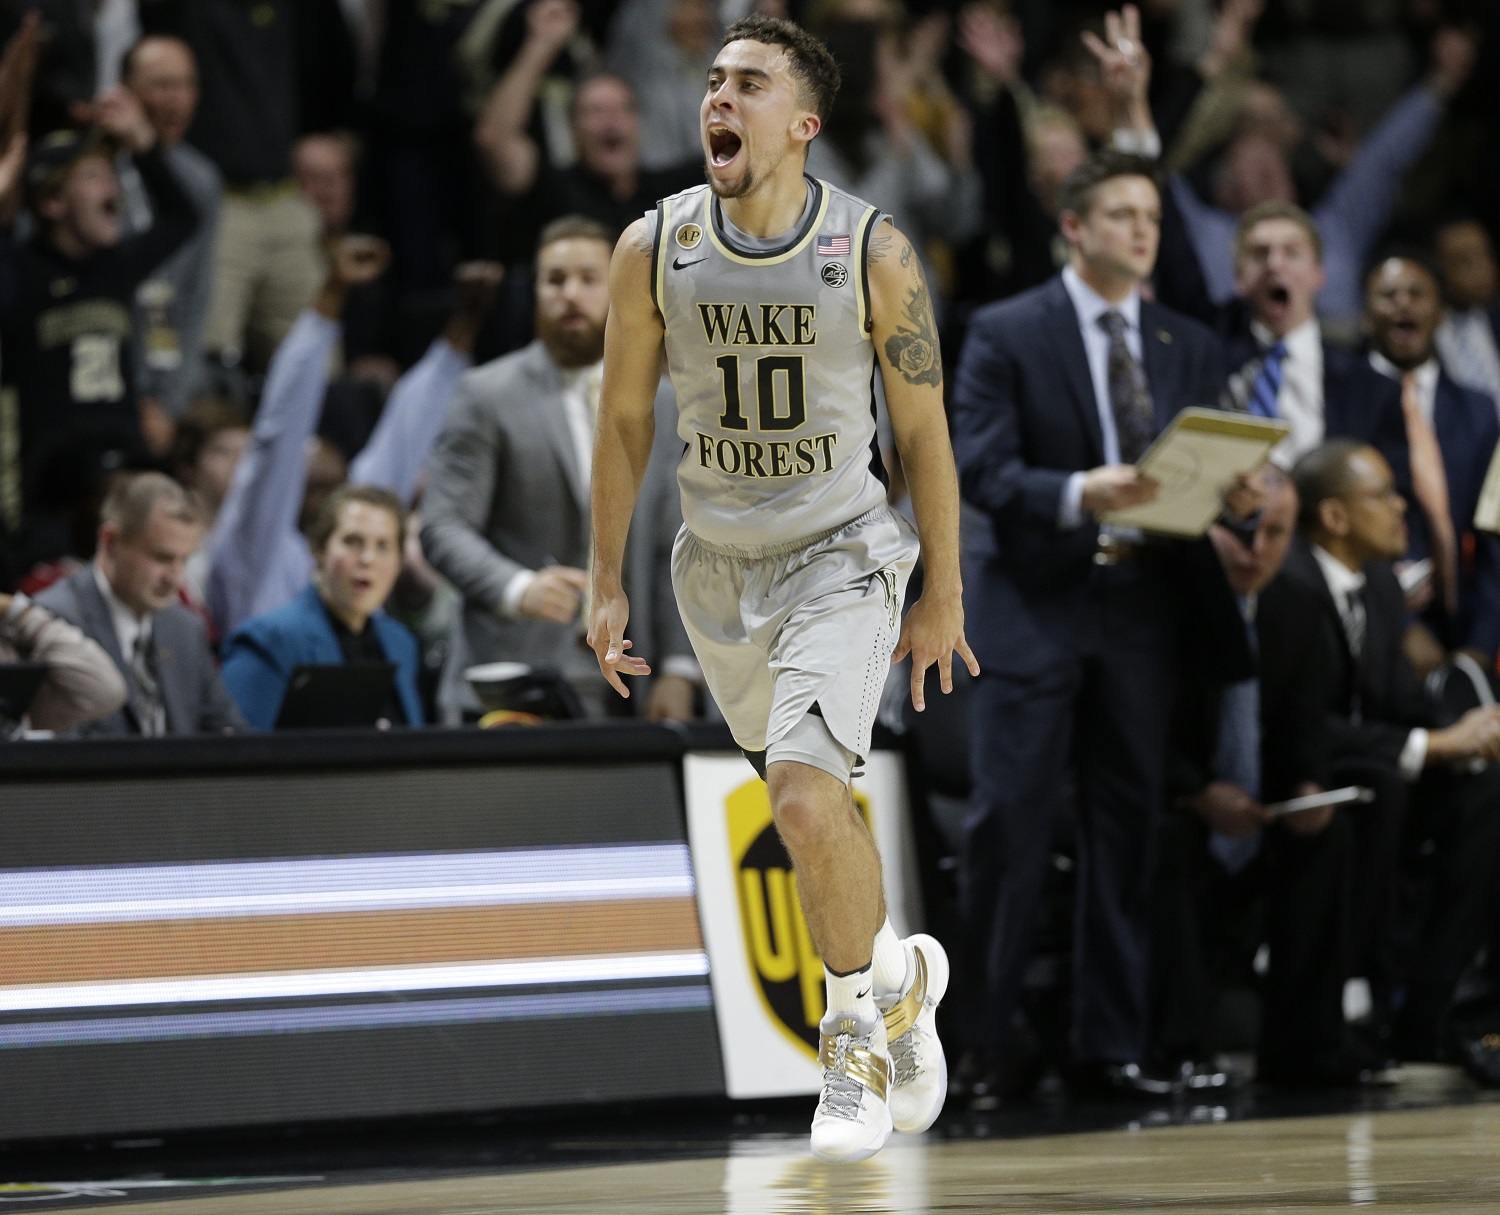 Wake Forest's Mitchell Wilbekin (10) reacts after making a basket against Louisville in the second half of an NCAA college basketball game in Winston-Salem, N.C., Wednesday, March 1, 2017. Wake Forest won 88-81. (AP Photo/Chuck Burton)